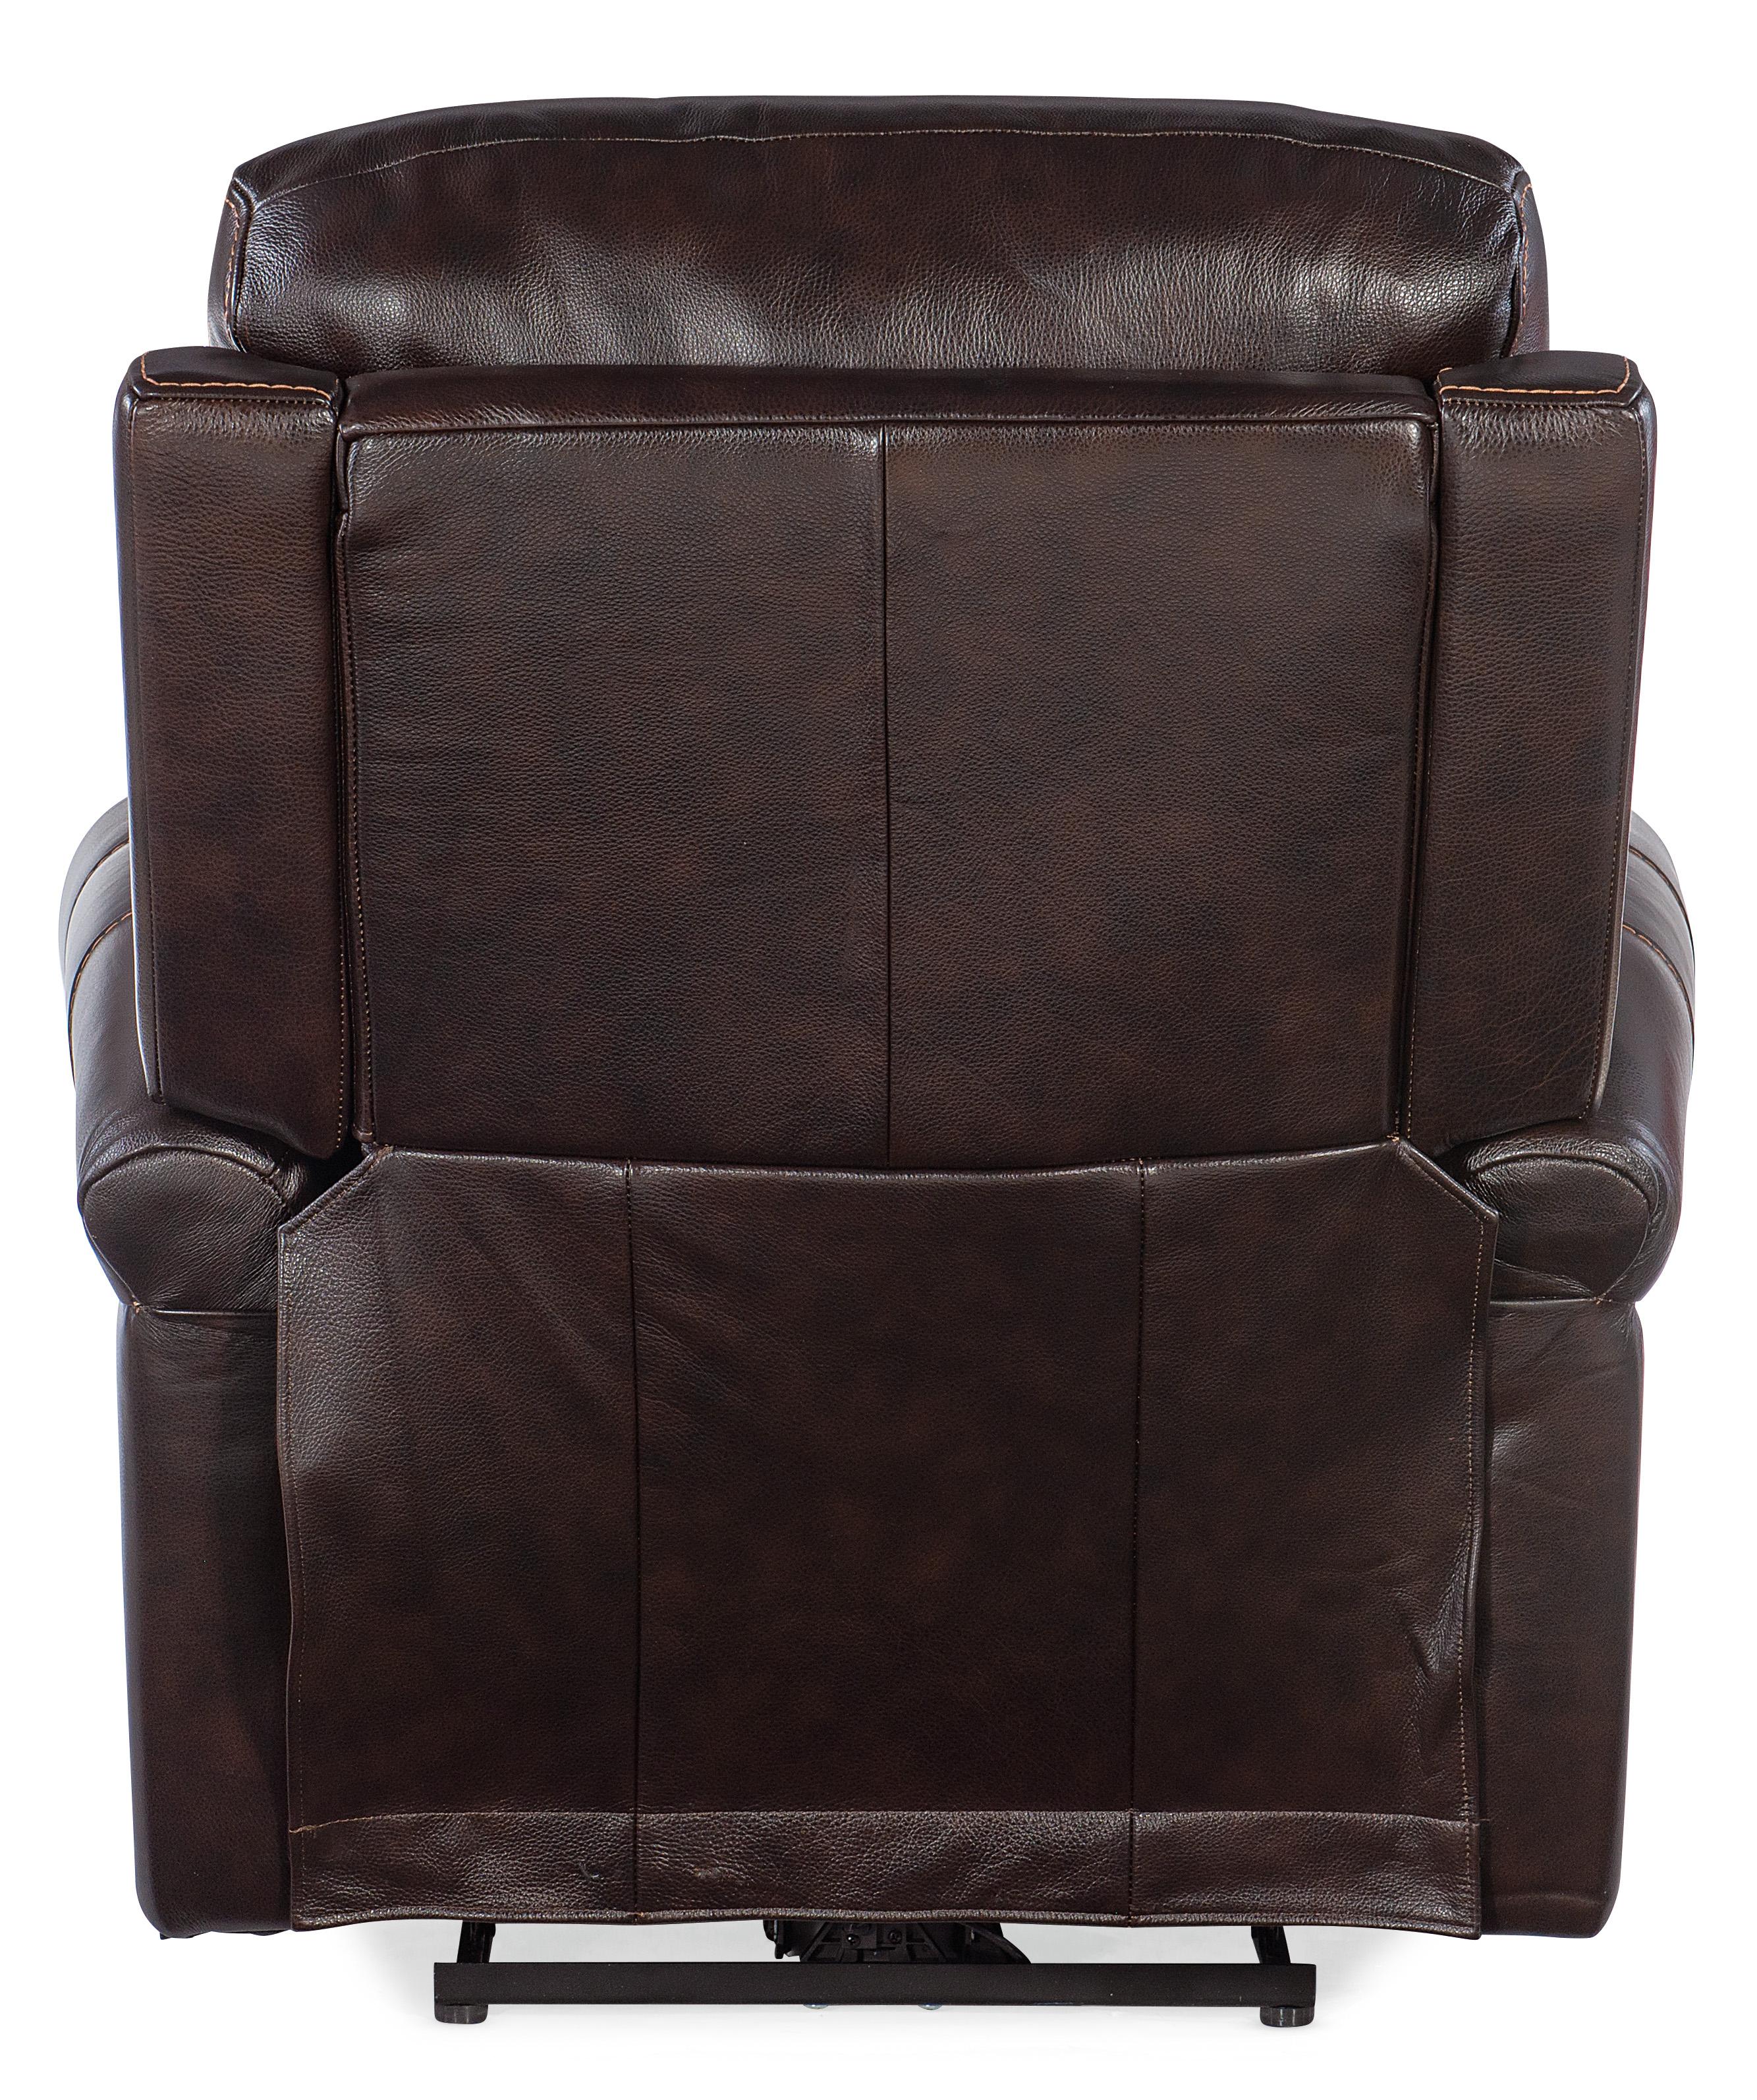 Eisley Power Recliner with Power Headrest and Lumbar - RC602-PHZL-089